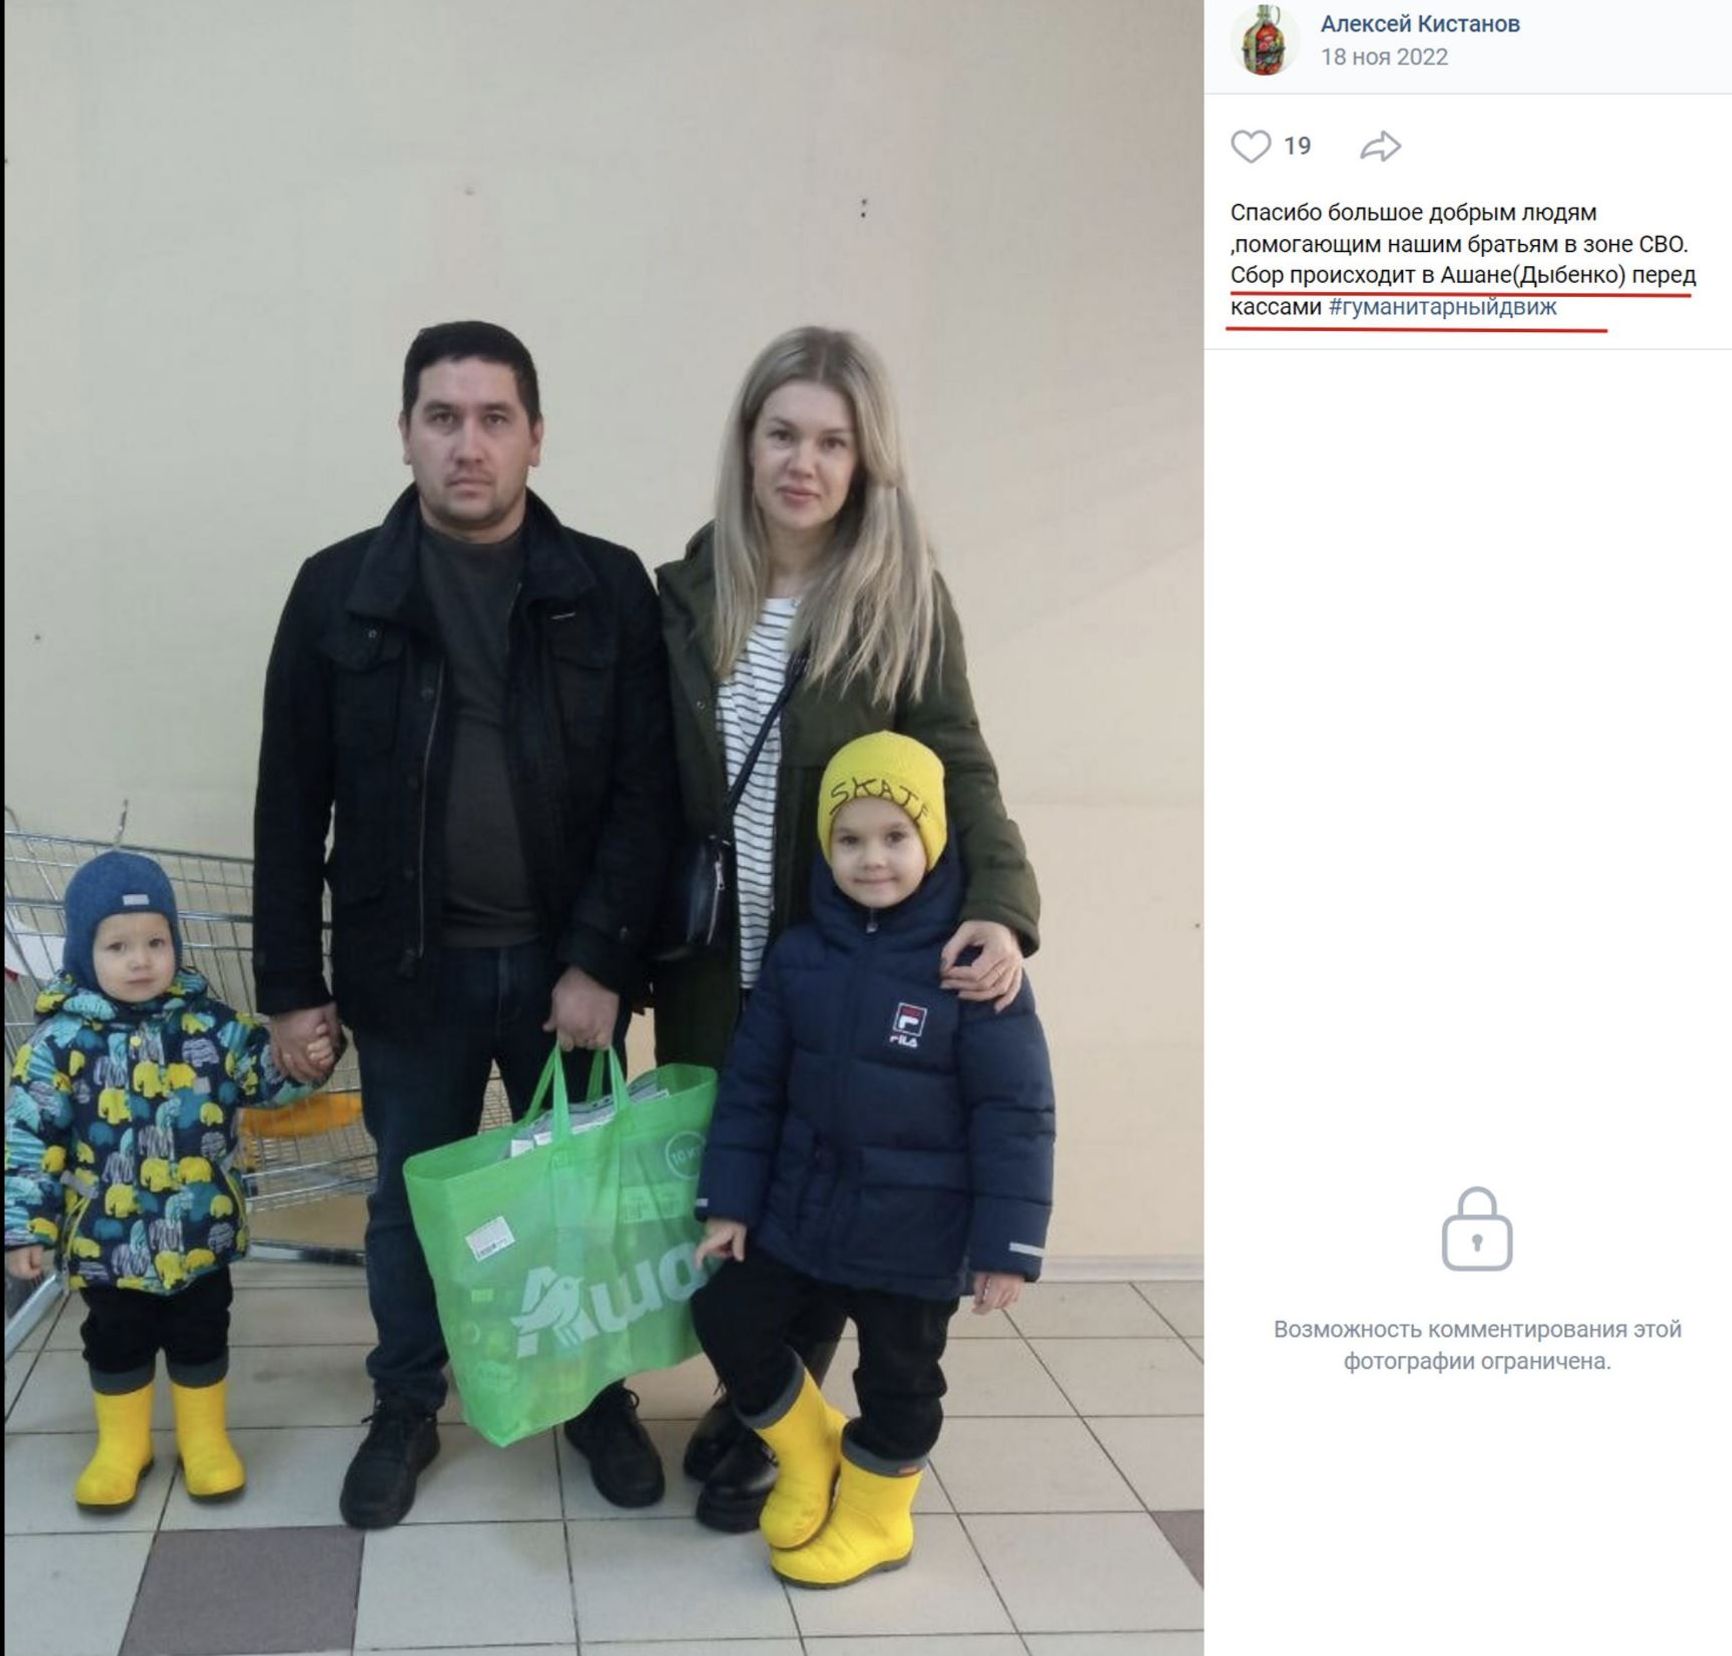 Photo caption: “A big thank you to the good people who help our brothers in the SMO. Collection point is in front of the cash registers in the Dybenko Auchan store”